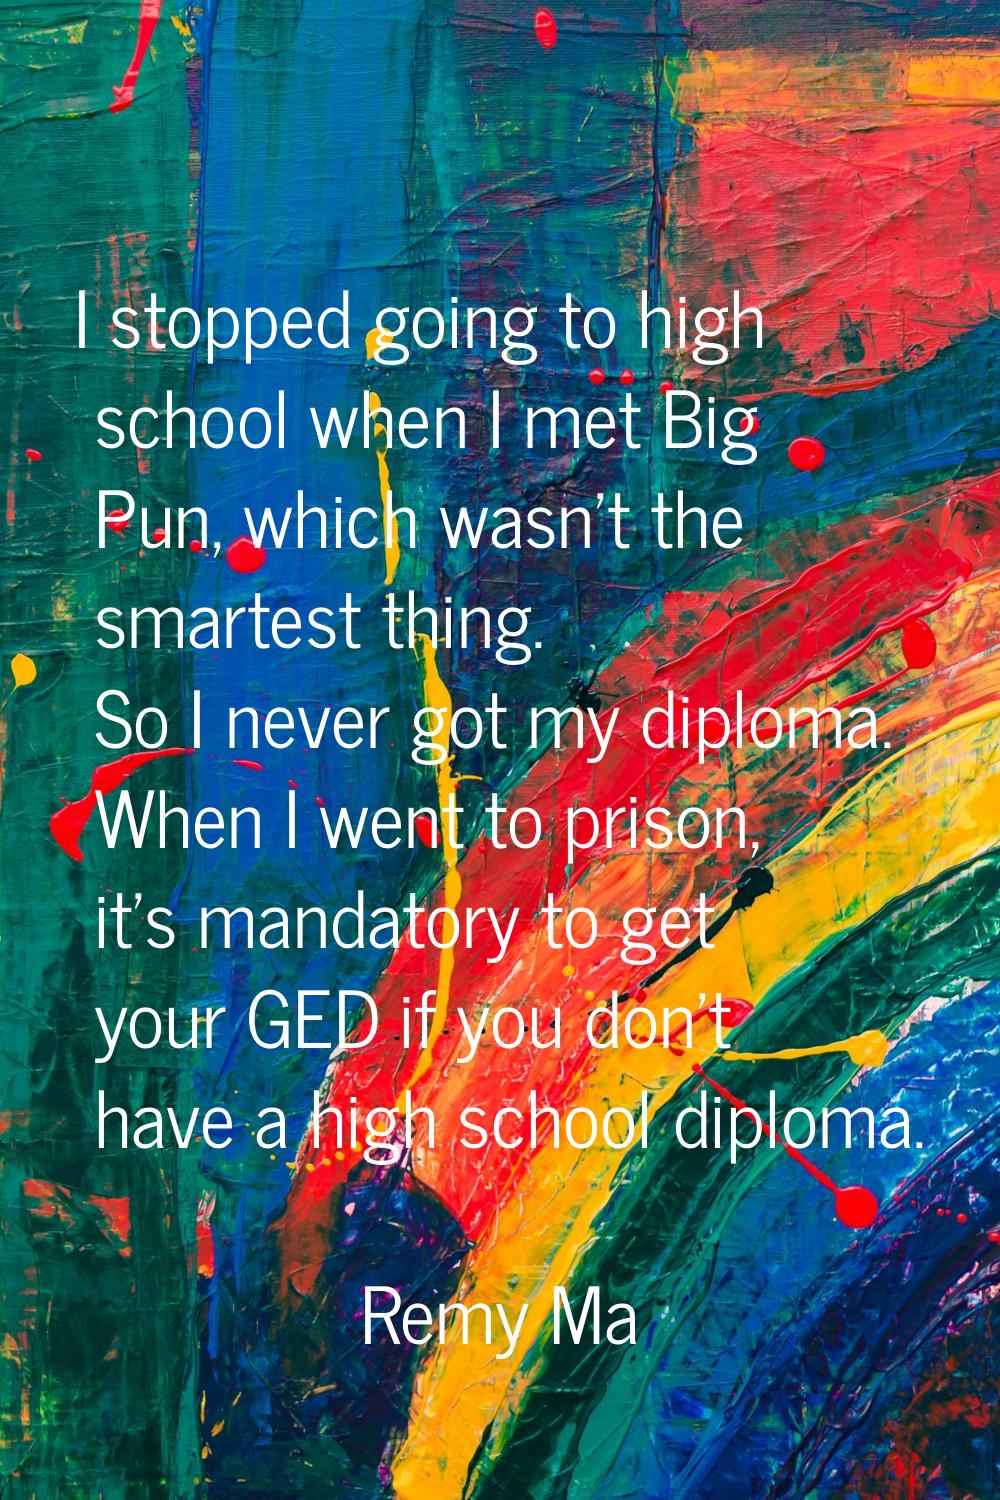 I stopped going to high school when I met Big Pun, which wasn't the smartest thing. So I never got 